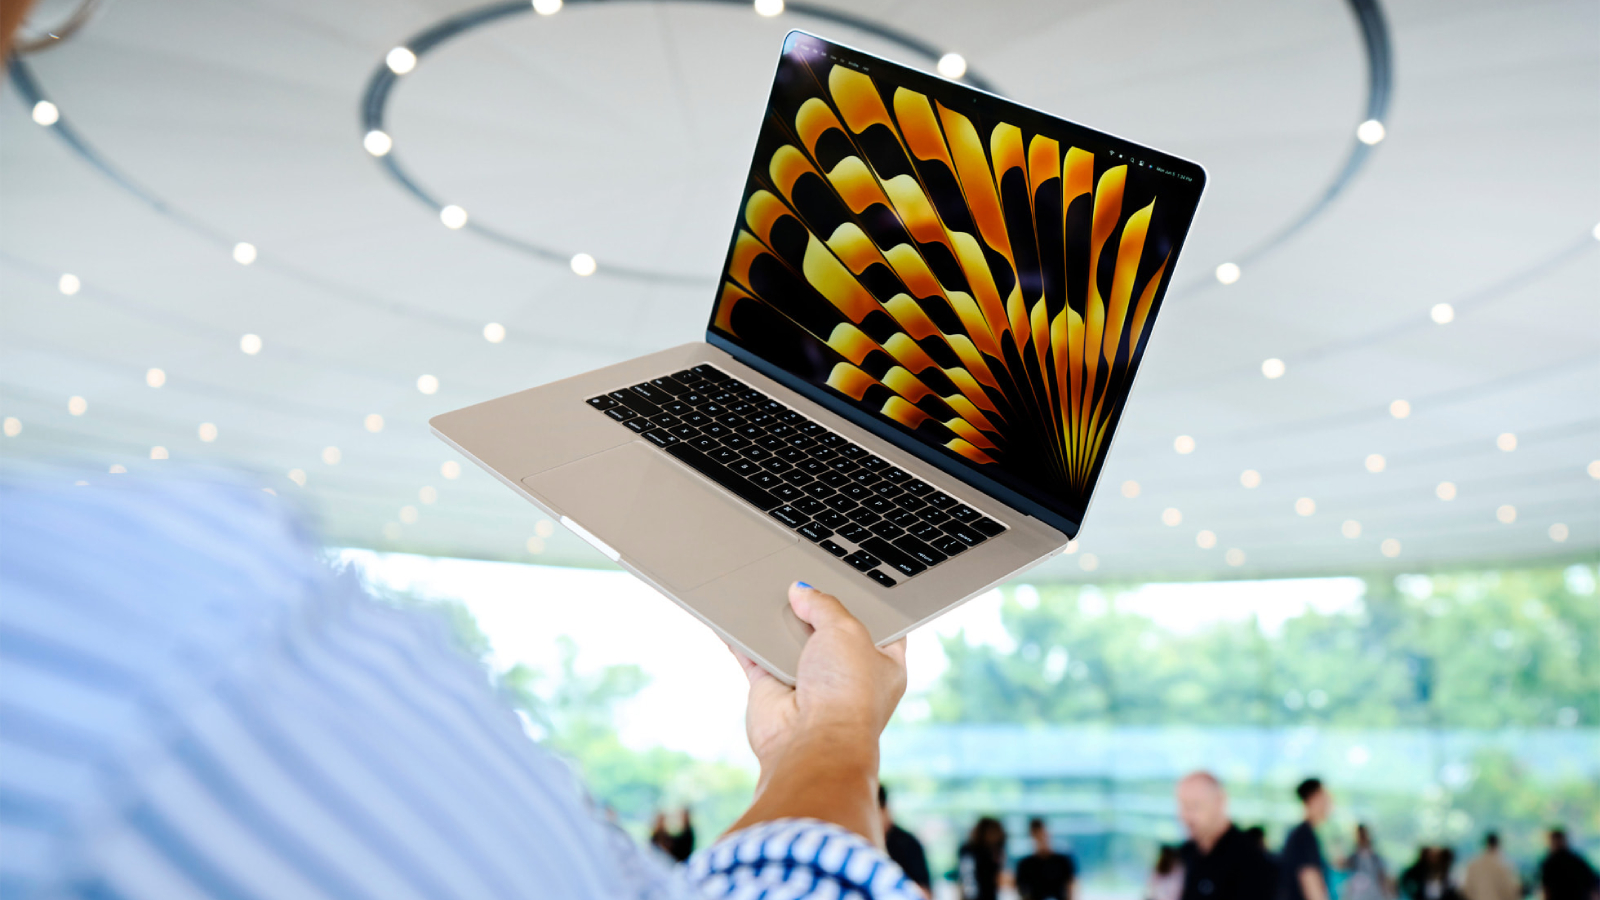 15-inch MacBook Air hands on - The Verge